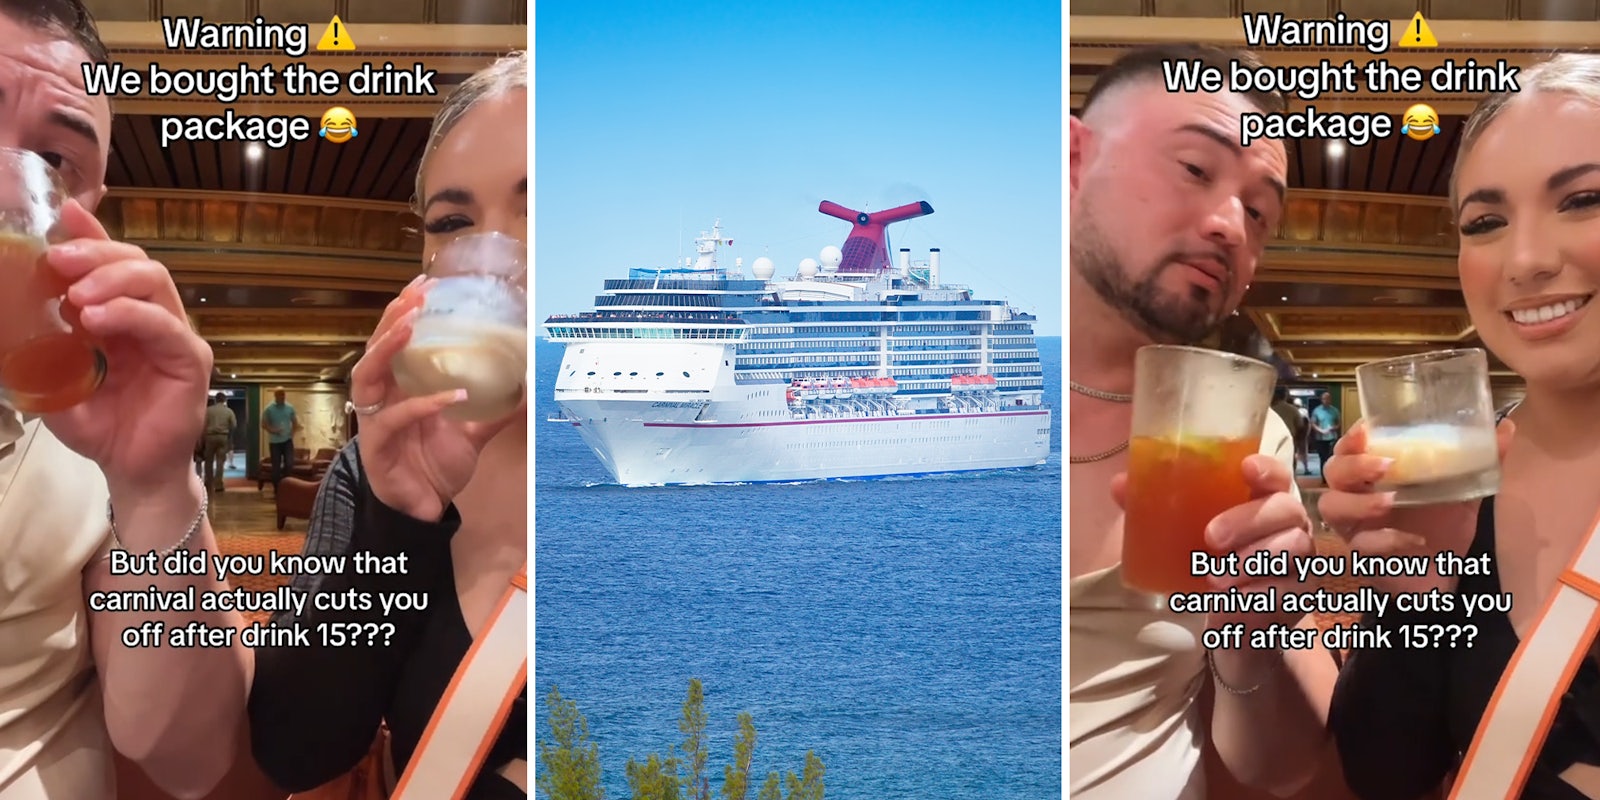 Carnival Cruise guests say they were cut off even though they purchased drink package